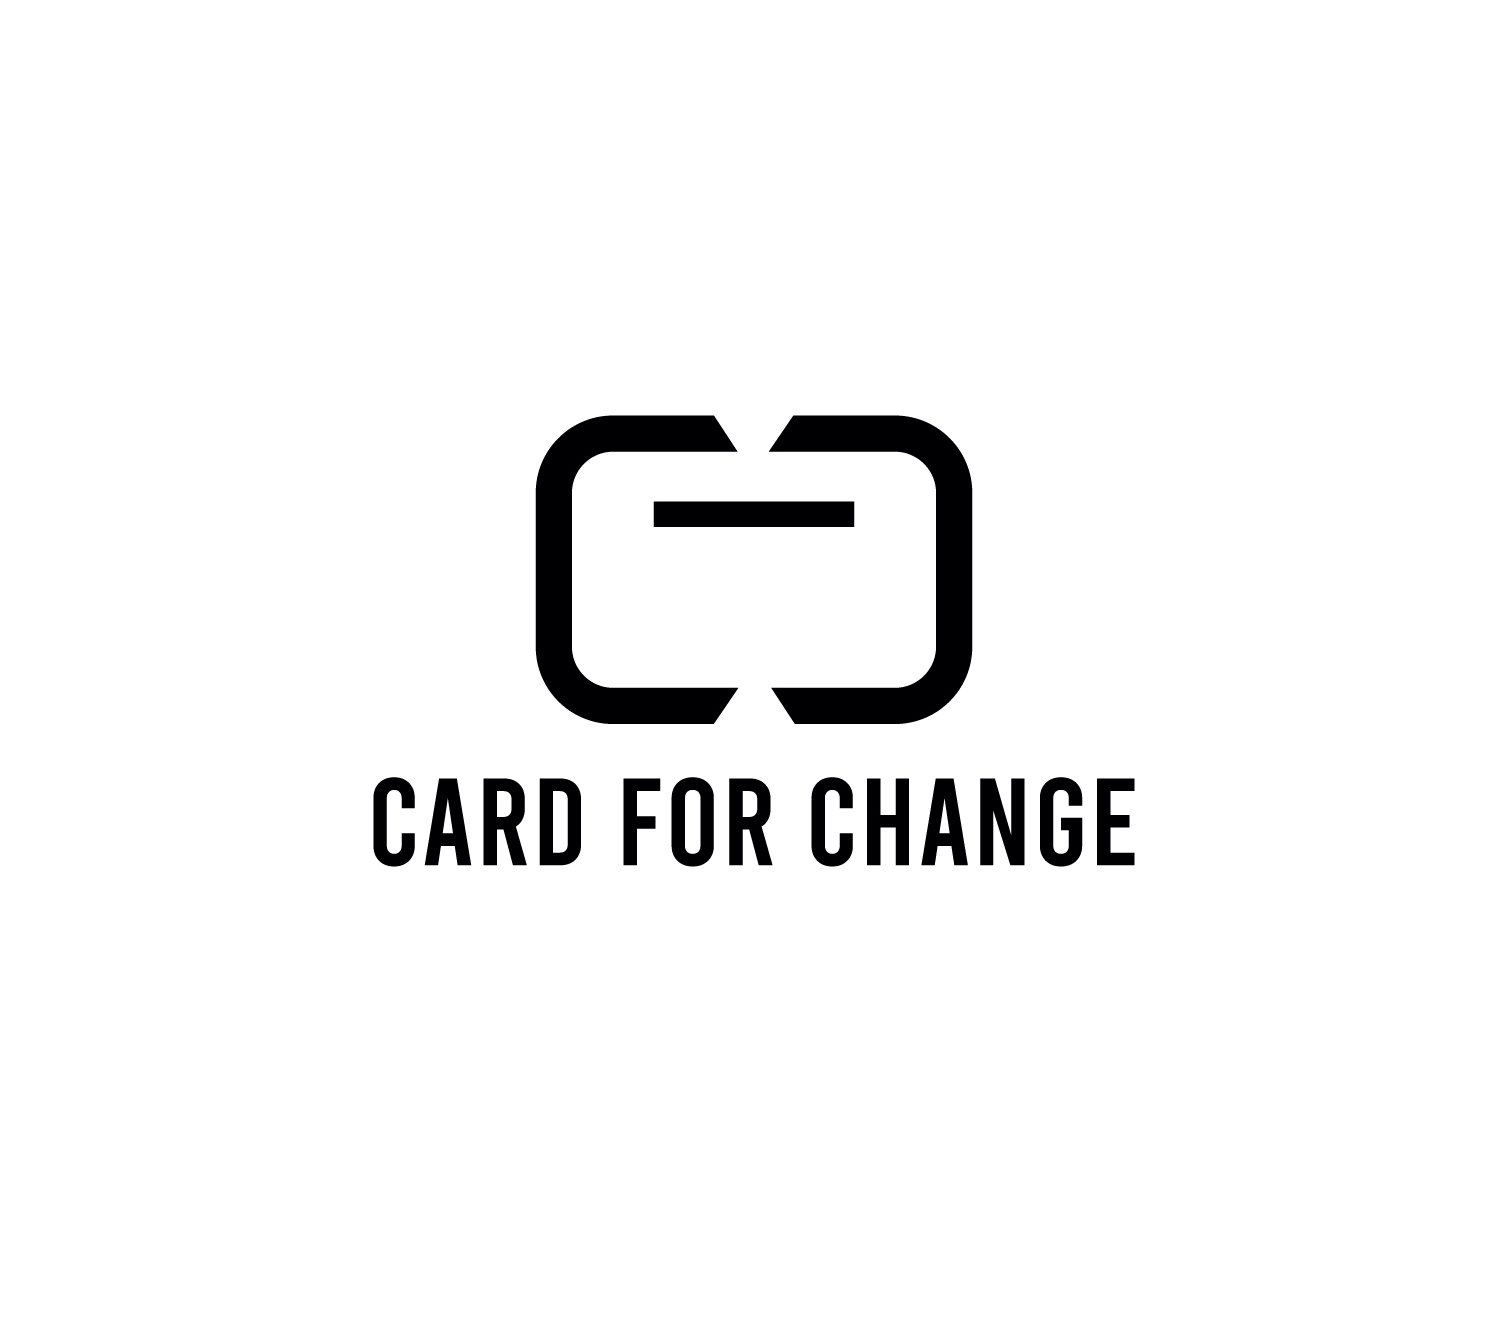 Card for Change